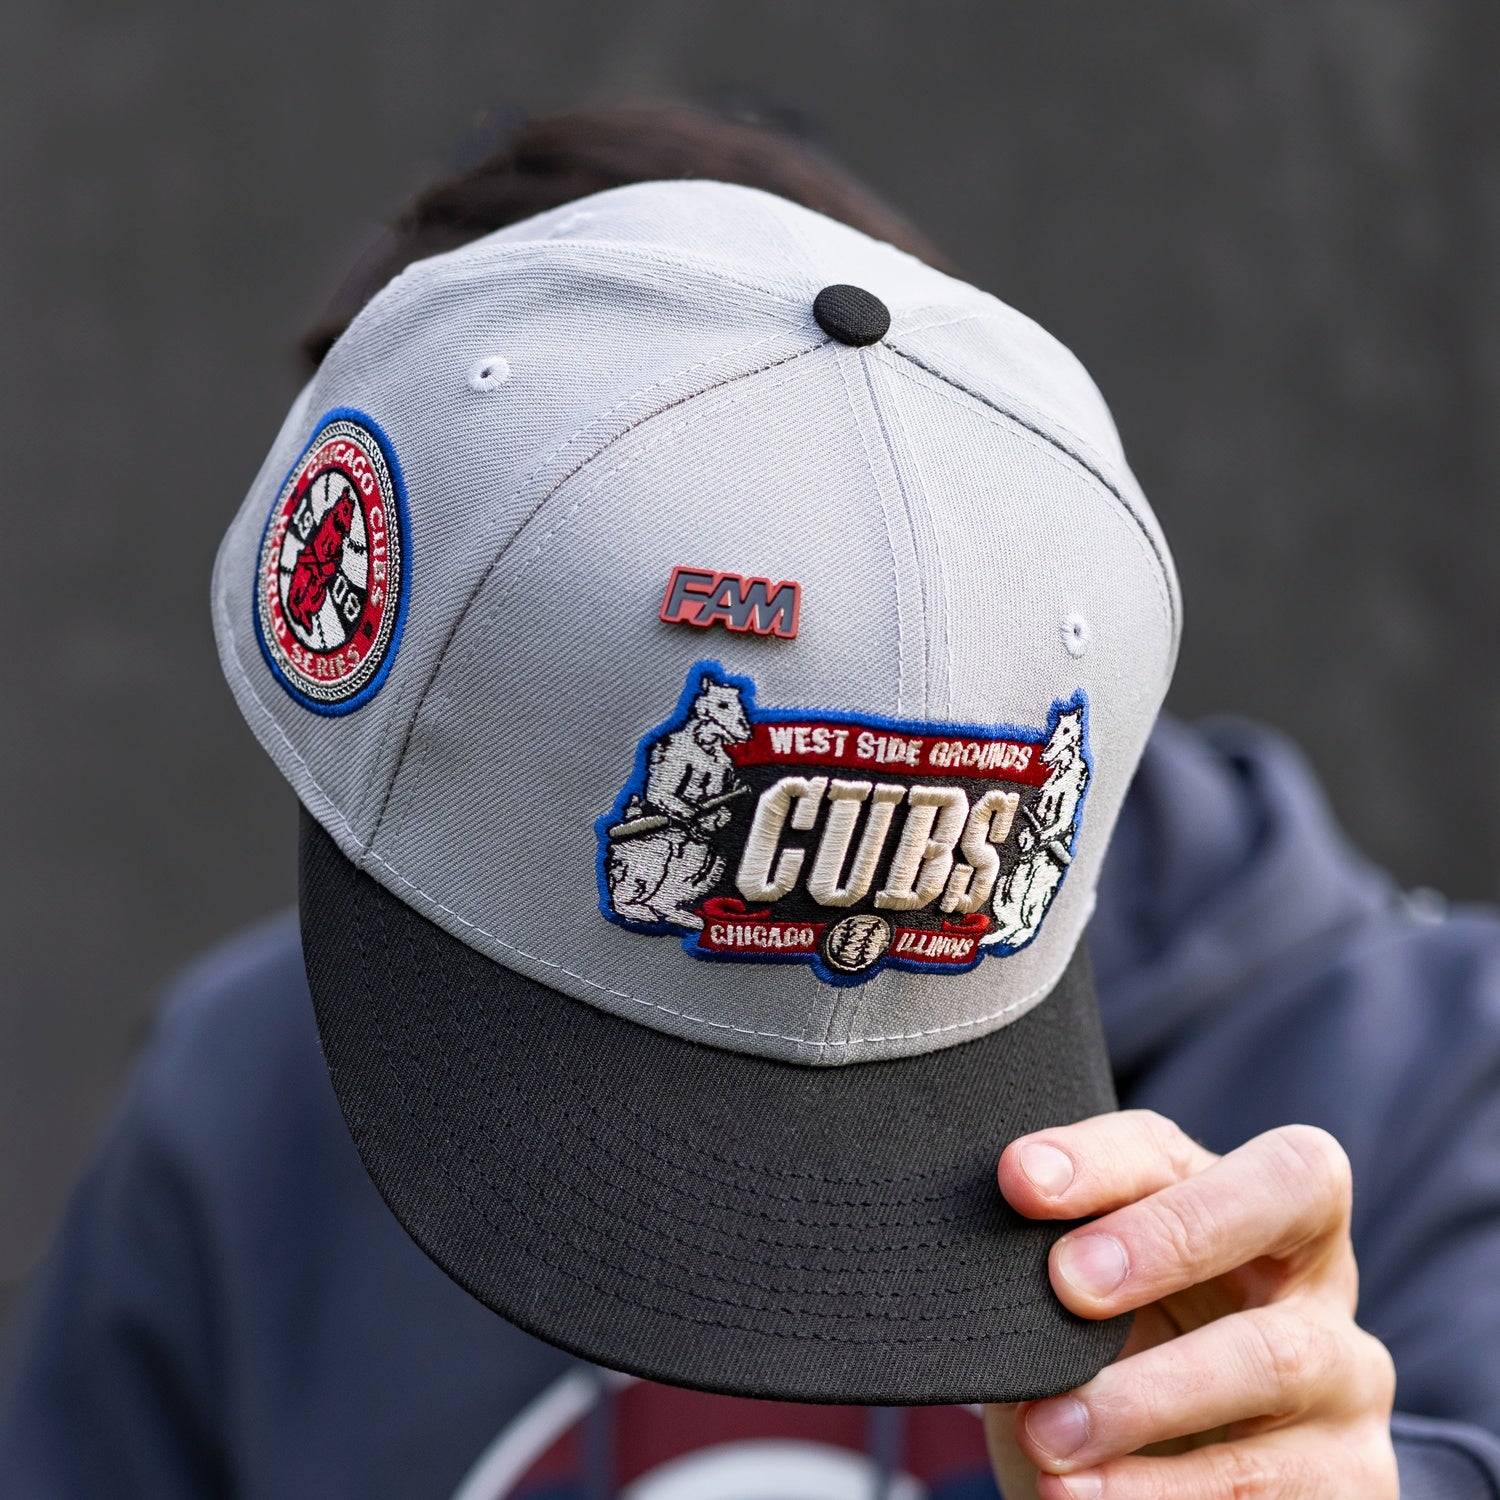 NEW ERA 59FIFTY MLB CHICAGO CUBS WORLD SERIES 1908 TWO TONE / SCARLET UV FITTED CAP